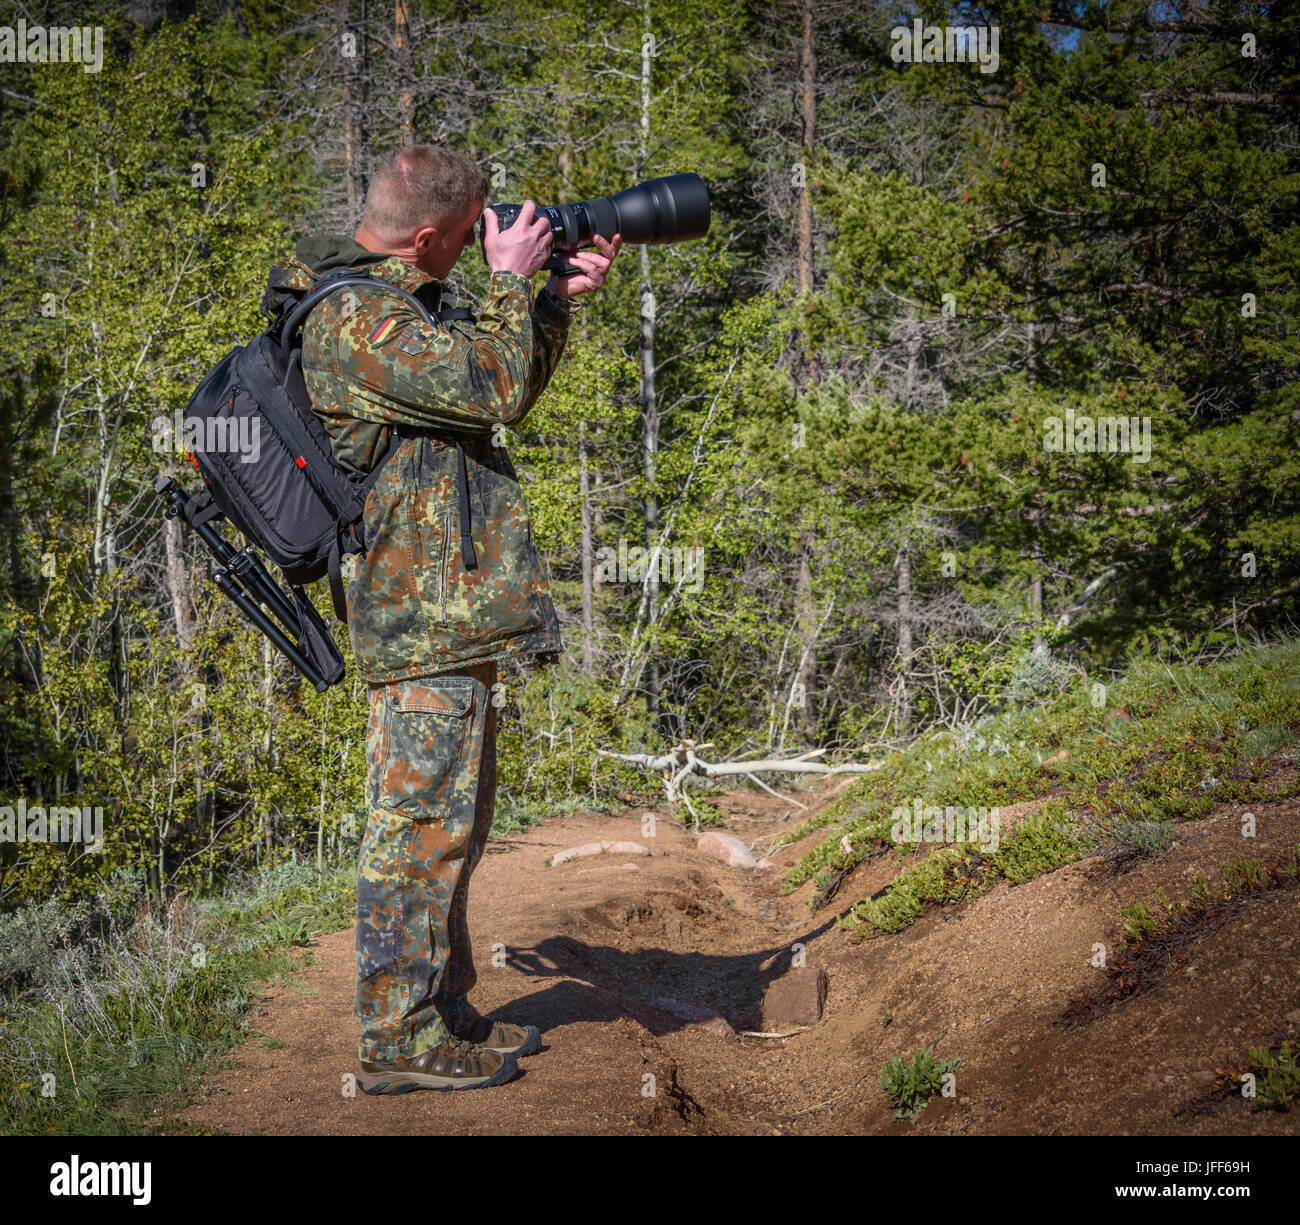 Wildlife, nature man photographer in camouflage outfit with a backpack and tripod standing on a mountain forest trail and shooting, taking pictures Stock Photo